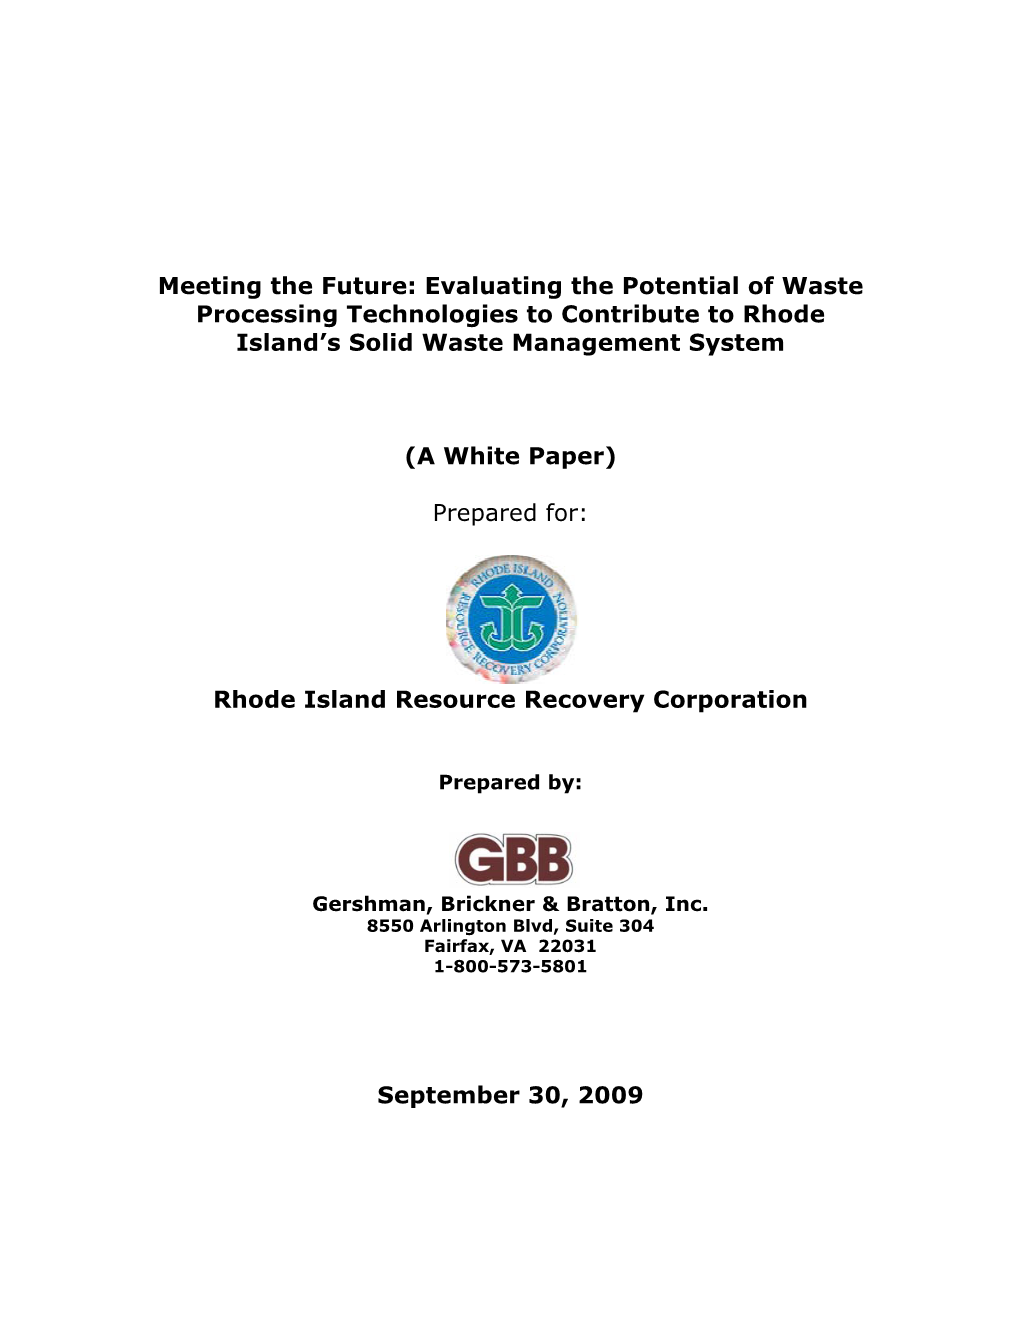 Waste Processing Technologies Study 2009